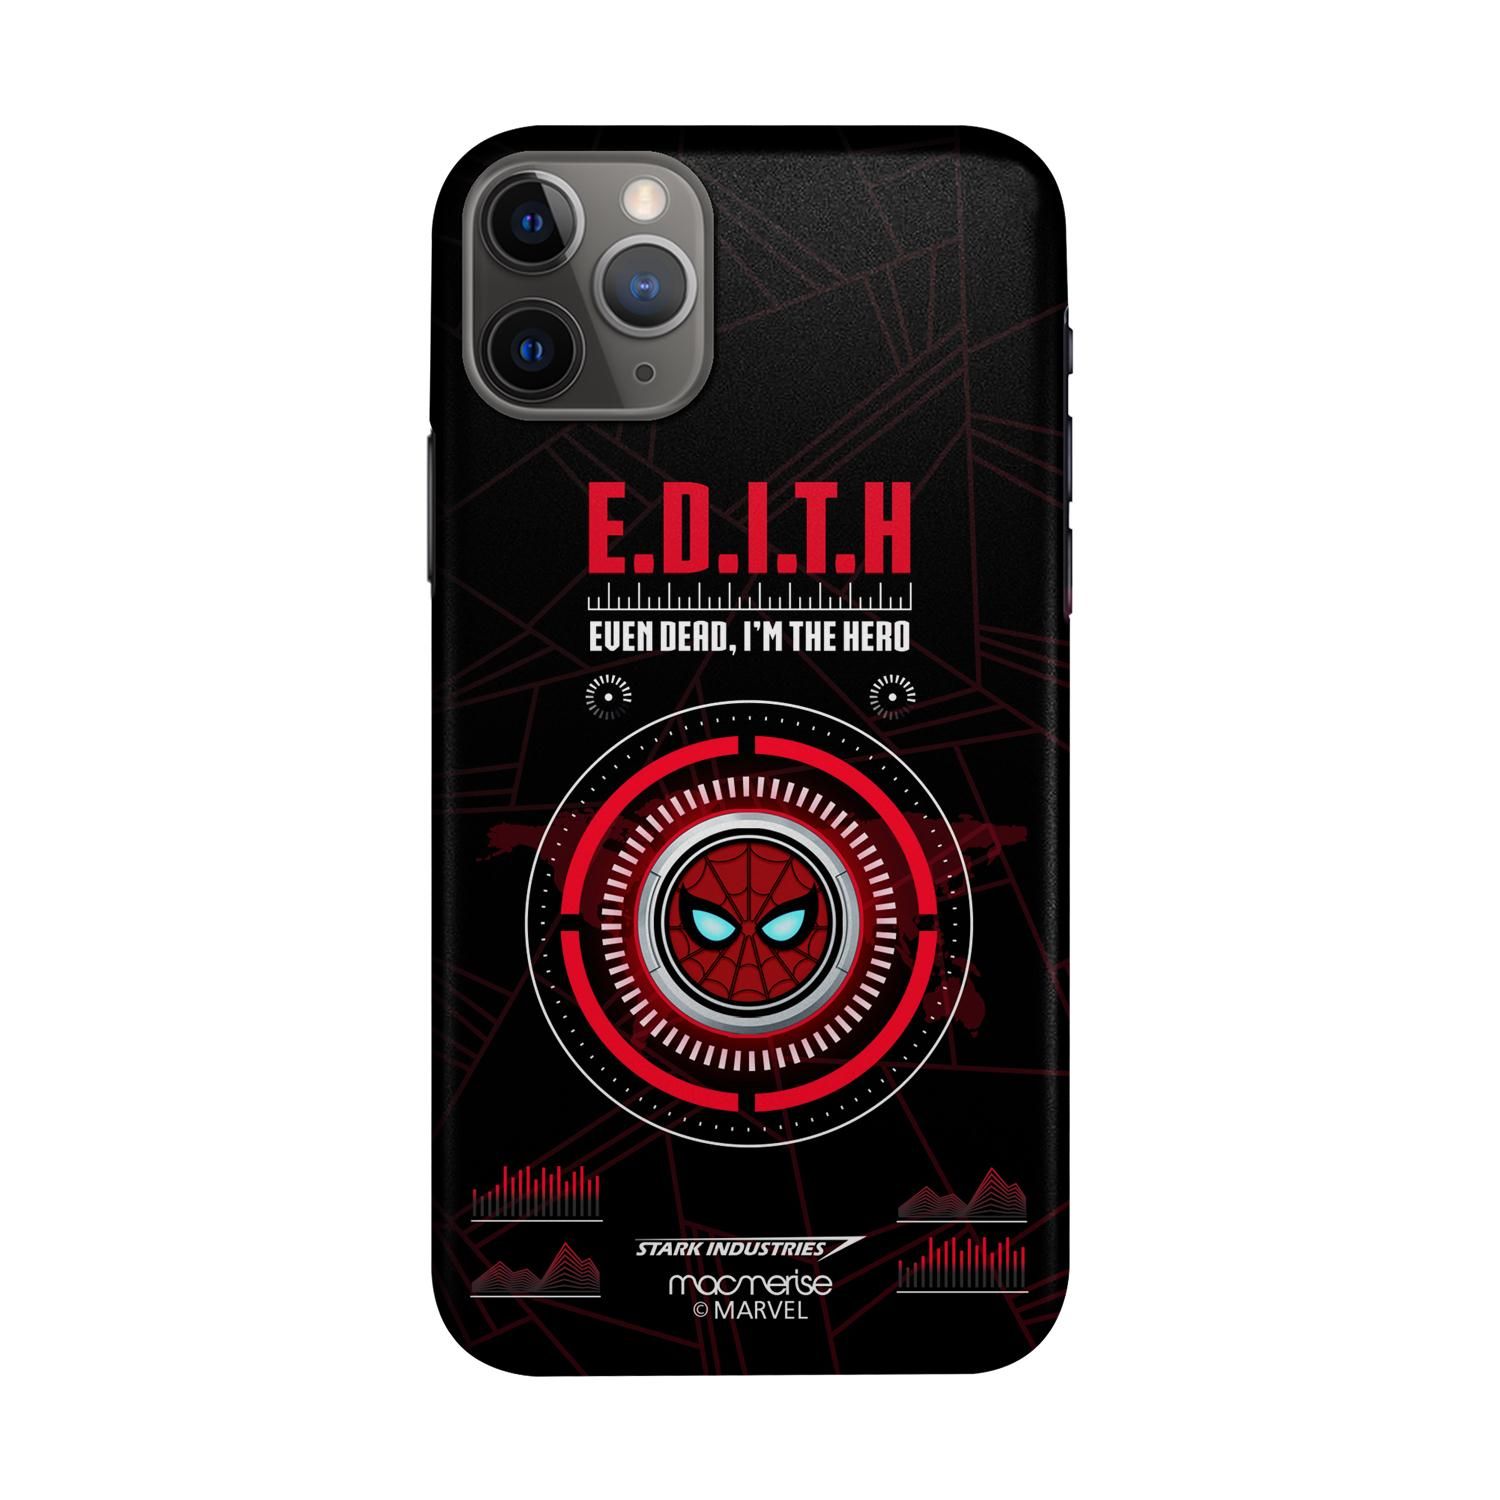 Buy Hello Edith - Sleek Phone Case for iPhone 11 Pro Max Online